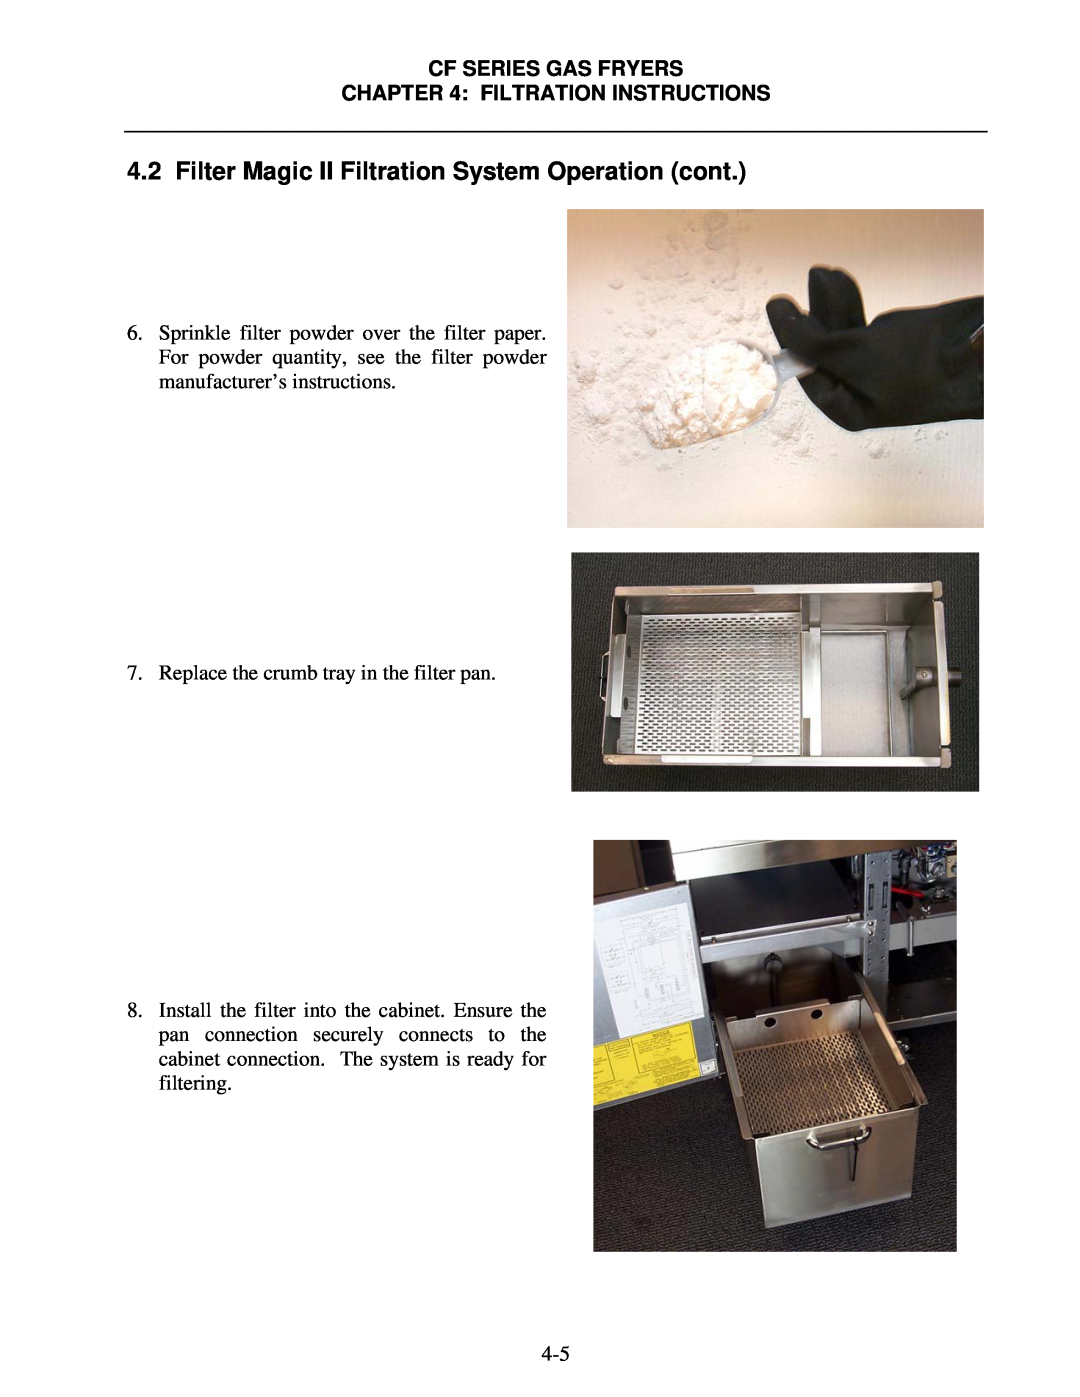 Frymaster FMCF operation manual Filter Magic II Filtration System Operation cont, Replace the crumb tray in the filter pan 